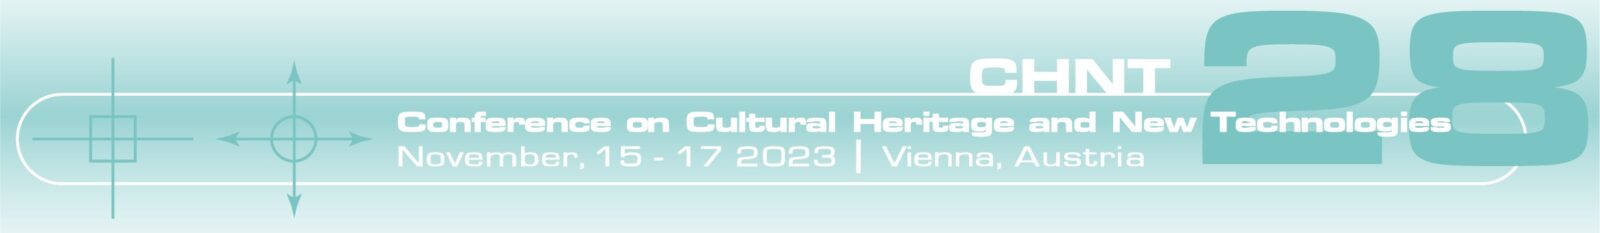 bunner CHNT conference on cultural heritage and new technologies november 2023 su fondo verde acqua